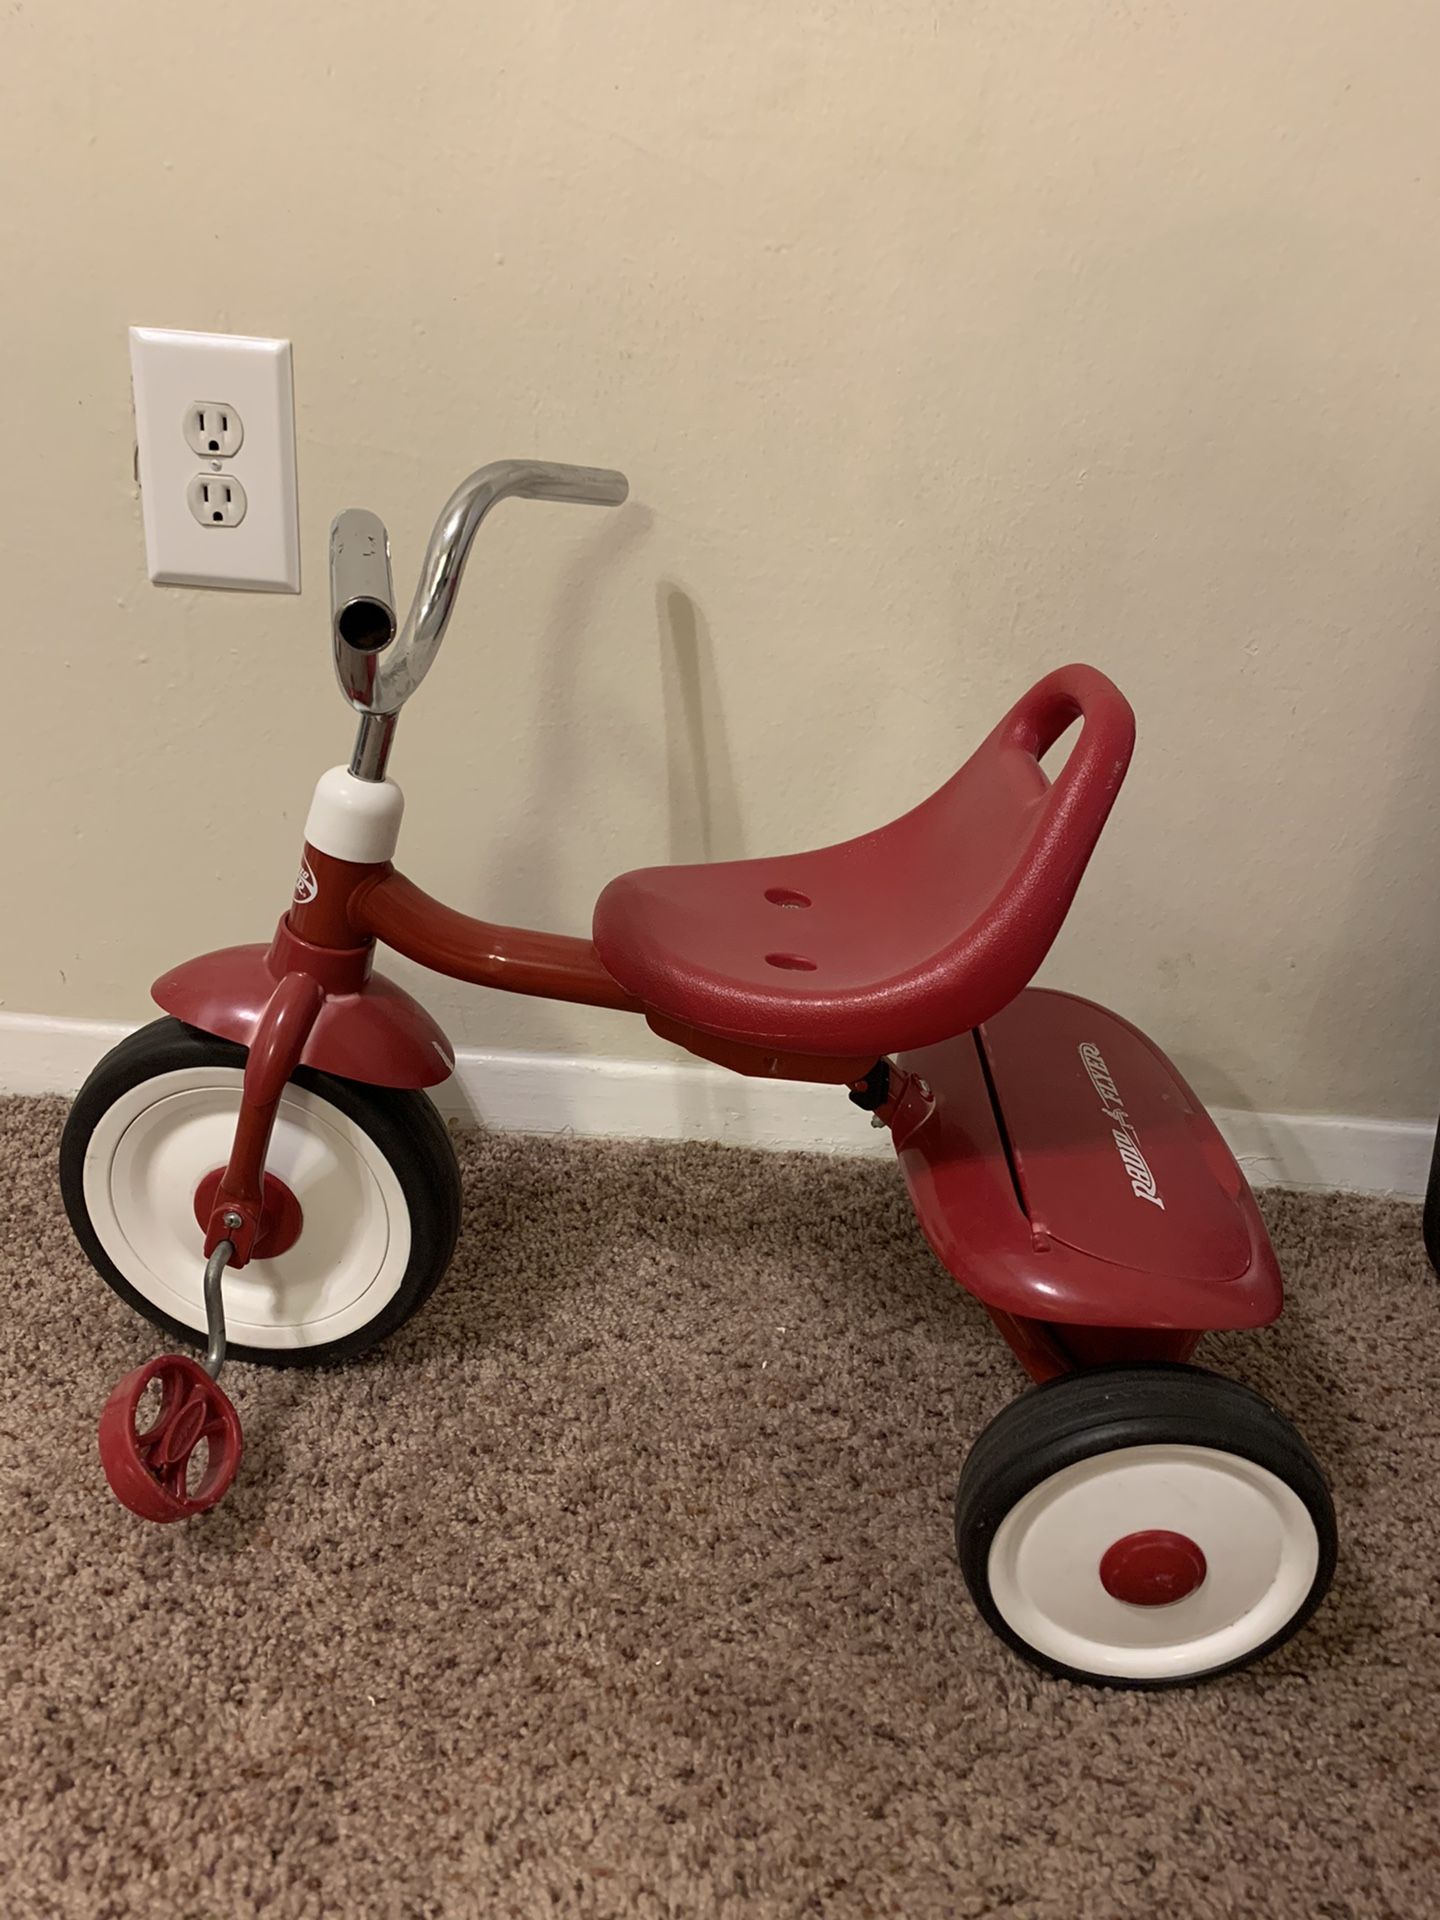 Radio Flyer Ready-To-Ride Folding Tricycle, Red